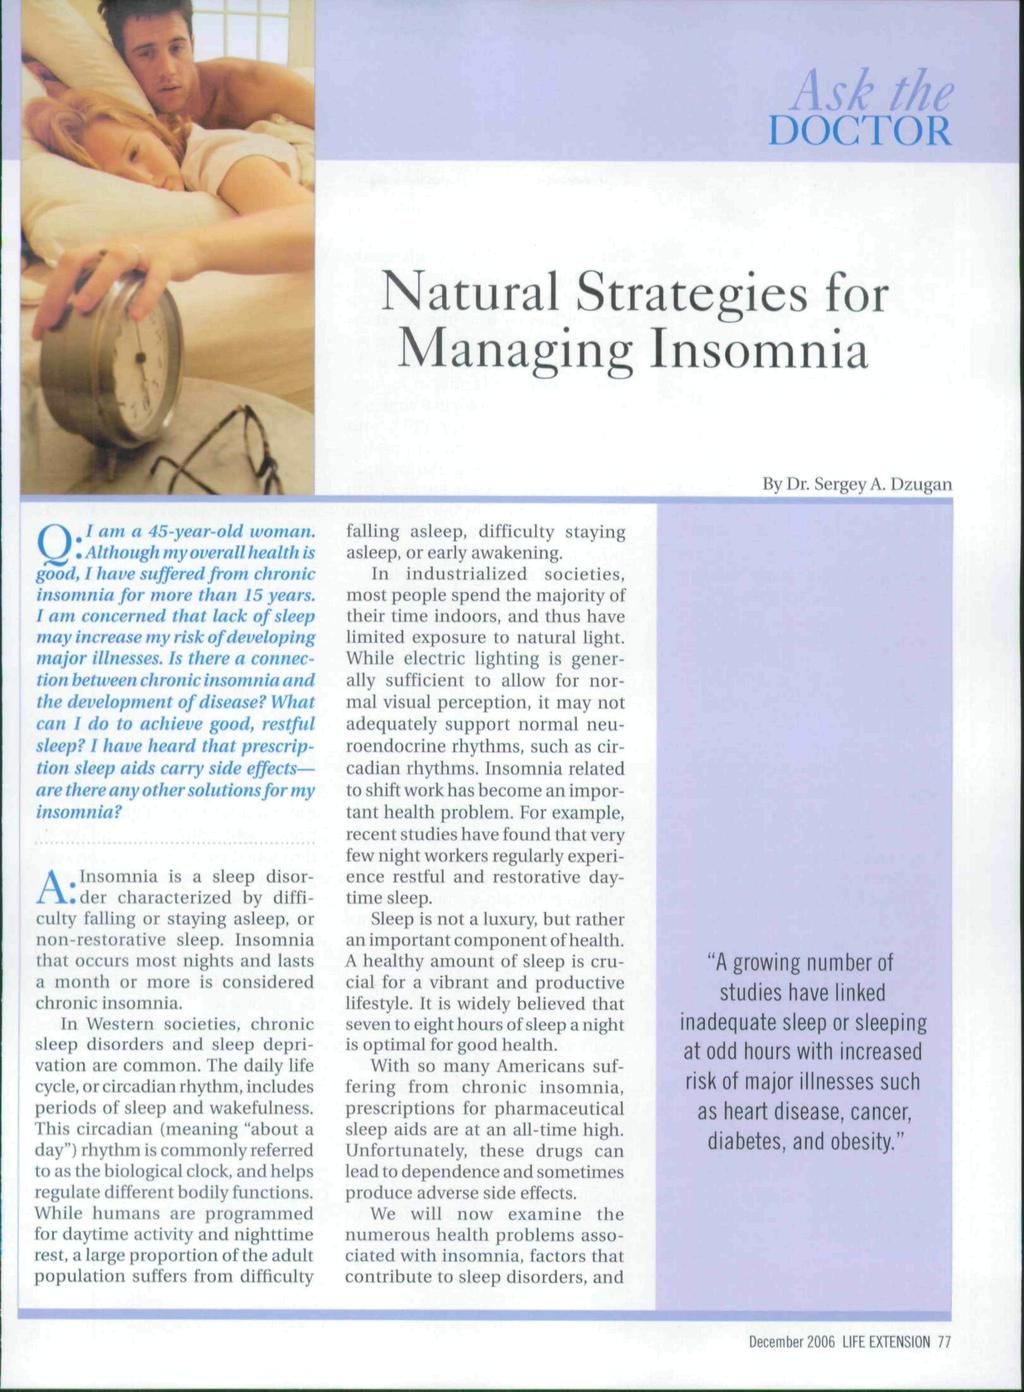 Natural Strategies for Managing Insomnia ^ / am a 45-year-old woman. Q Although my overall health is ^ood, I have sufferedfromchronic insomnia for more than 15 years.